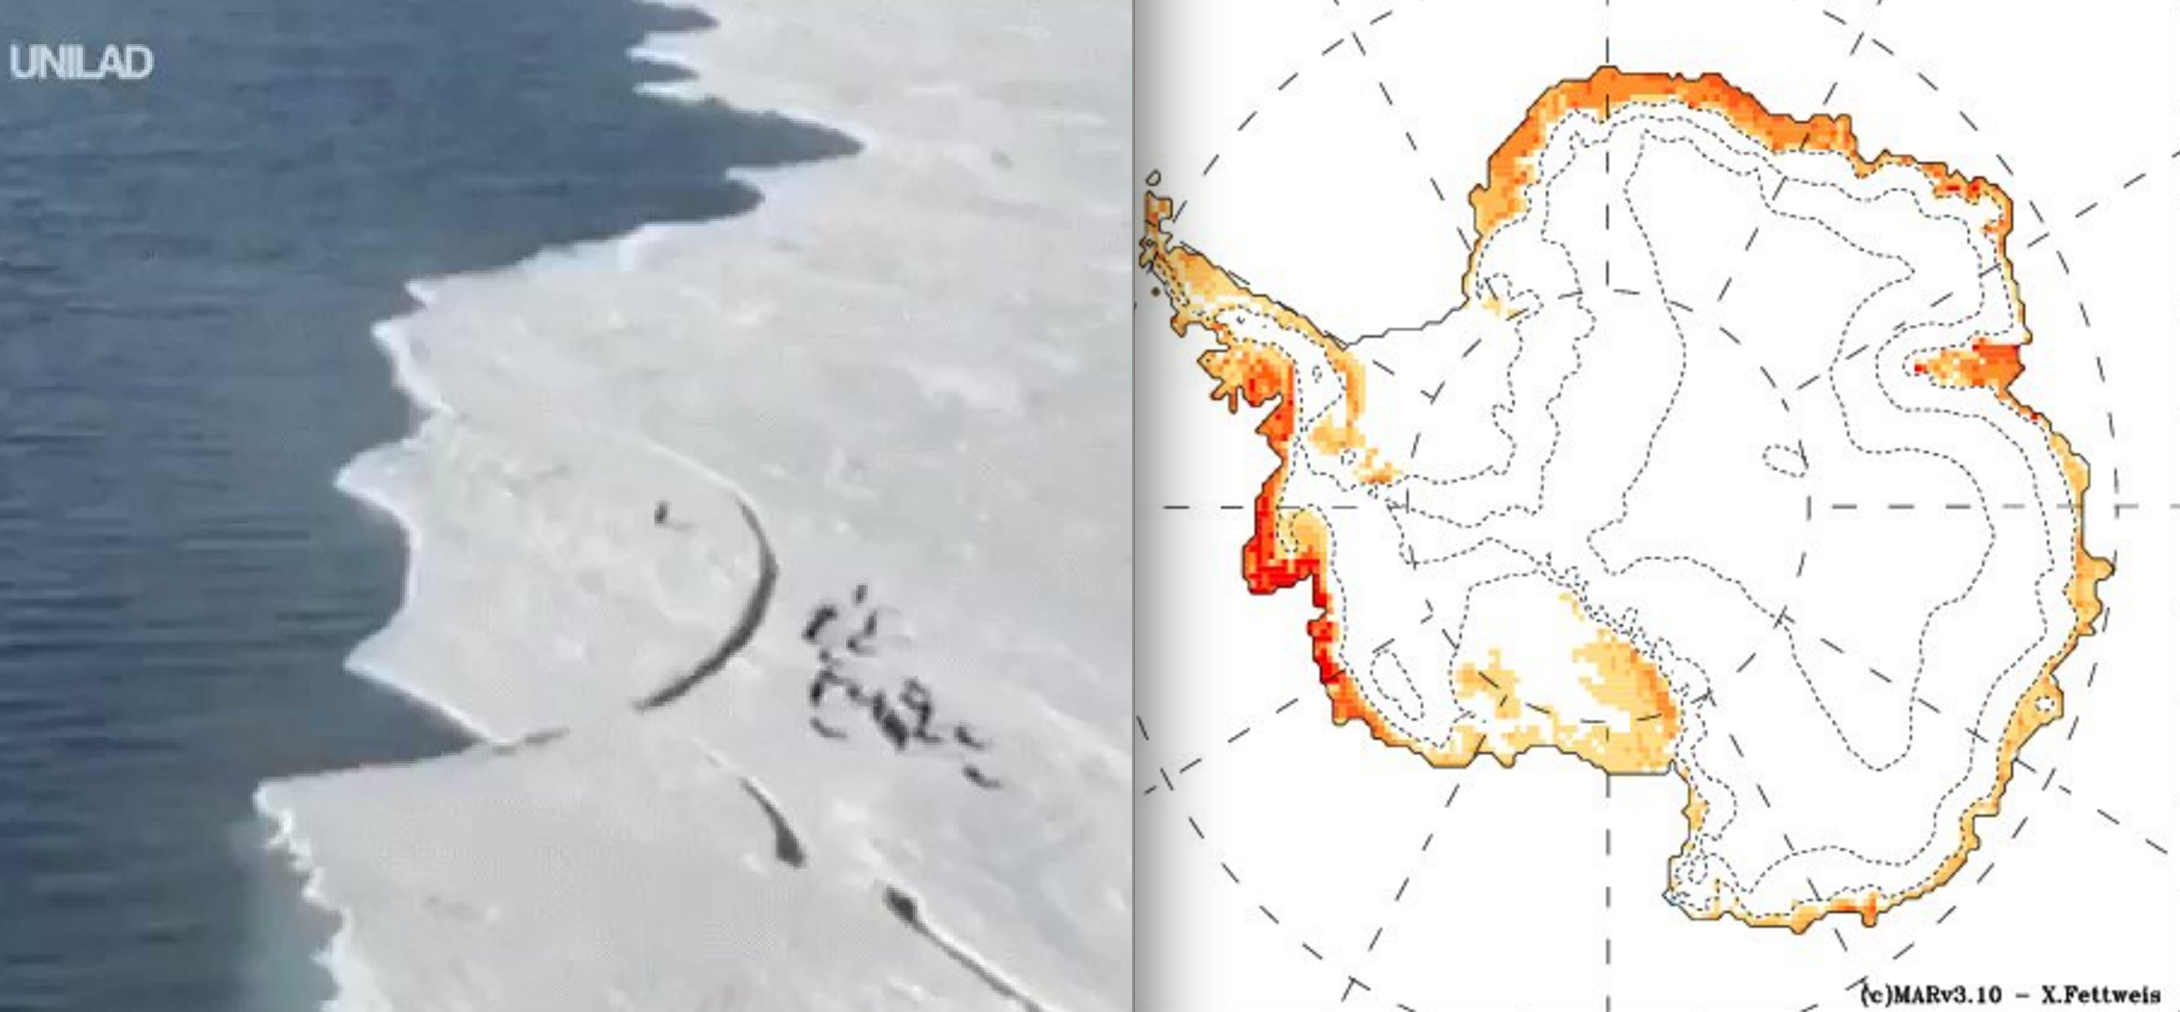 All-Time Record for Antarctic Ice-Melt over 24 Hr. Period Set on Christmas Eve 2019; Climatologists Declare ‘Planetary Emergency’